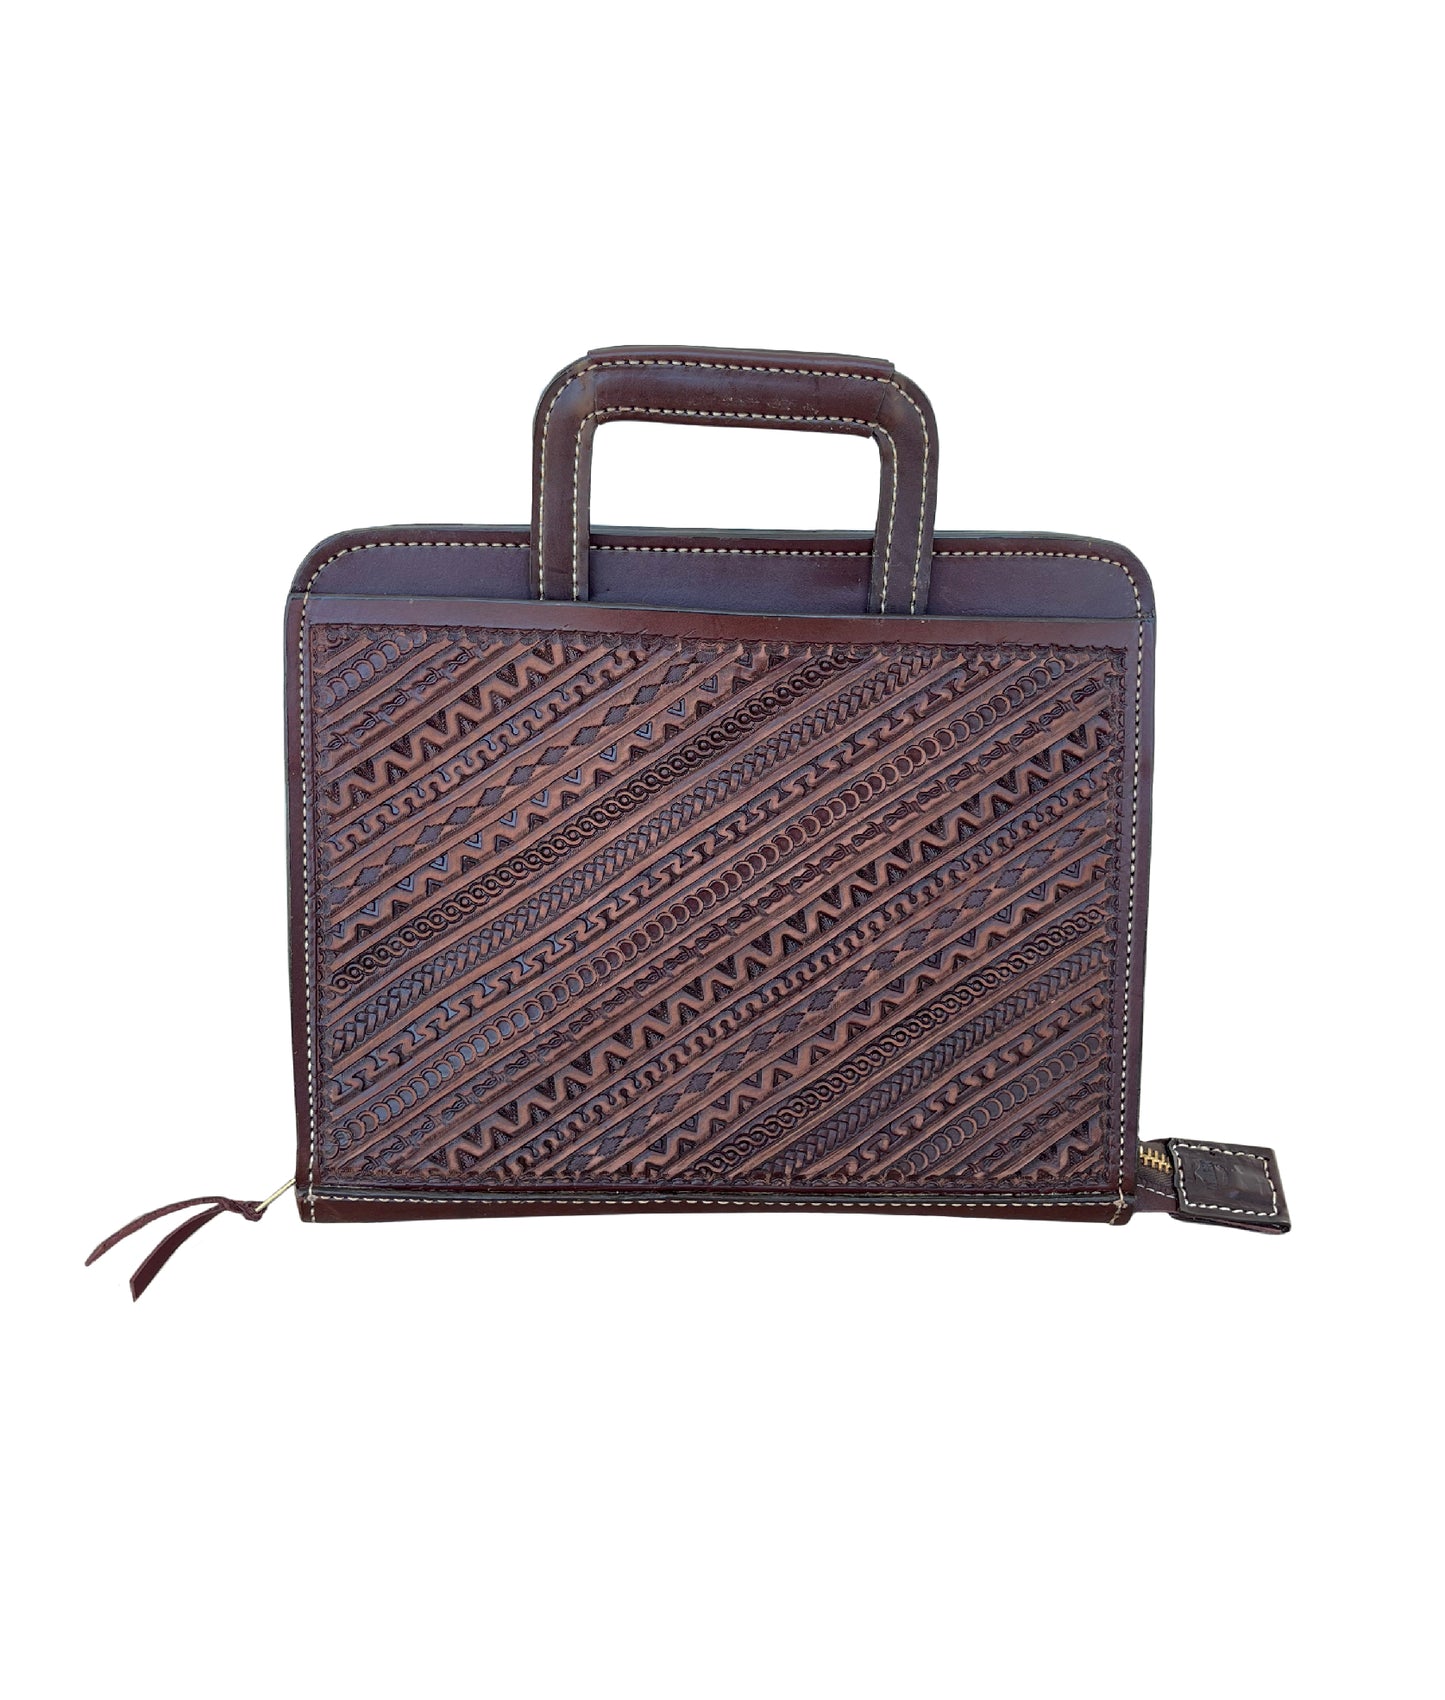 Cowboy Briefcase rough out chocolate leather geo-aztec tooling